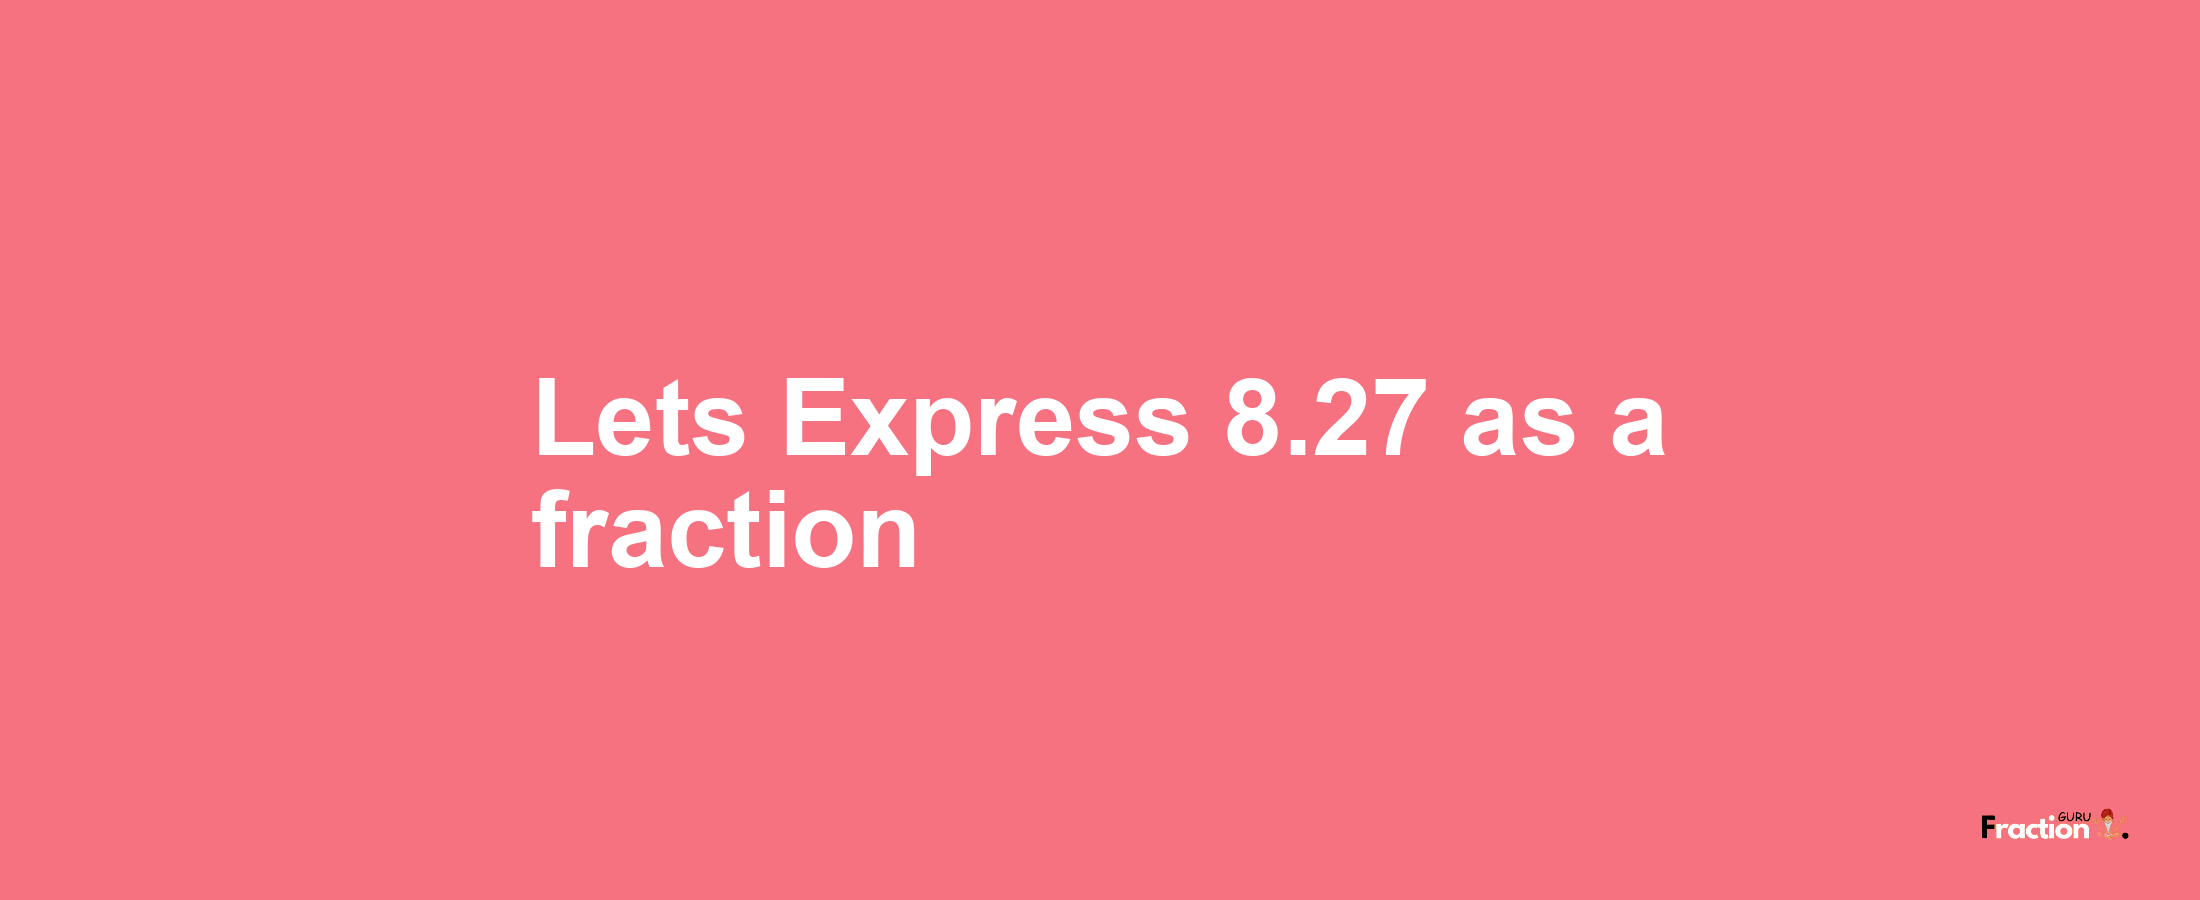 Lets Express 8.27 as afraction